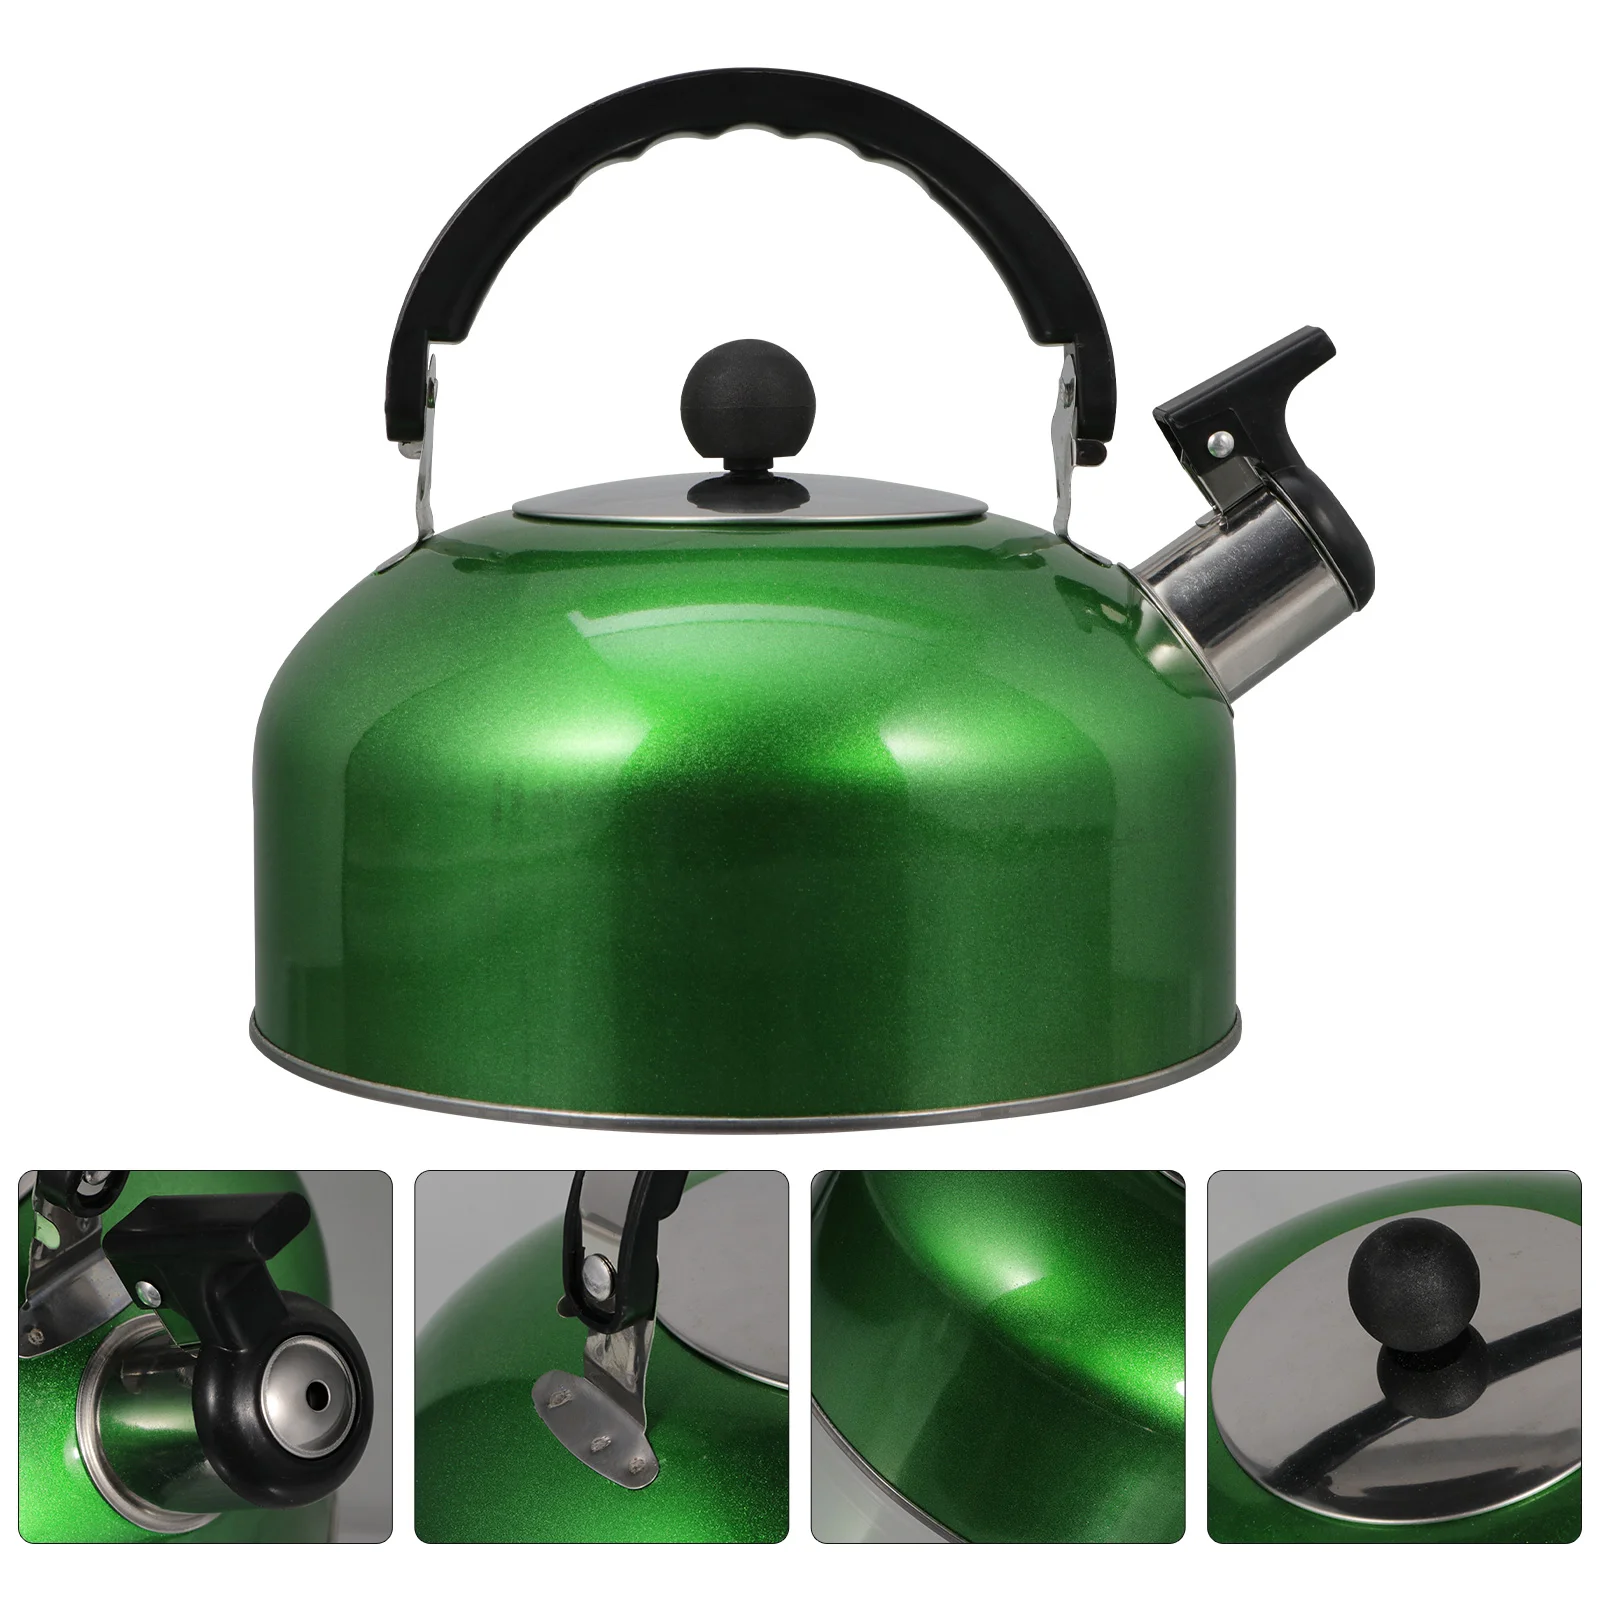 

Kettle Tea Whistling Teapot Stovetop Water Stove Steel Stainless Pot Boiling Teakettle Gas Kettles Handle Metal Coffee Pitcher